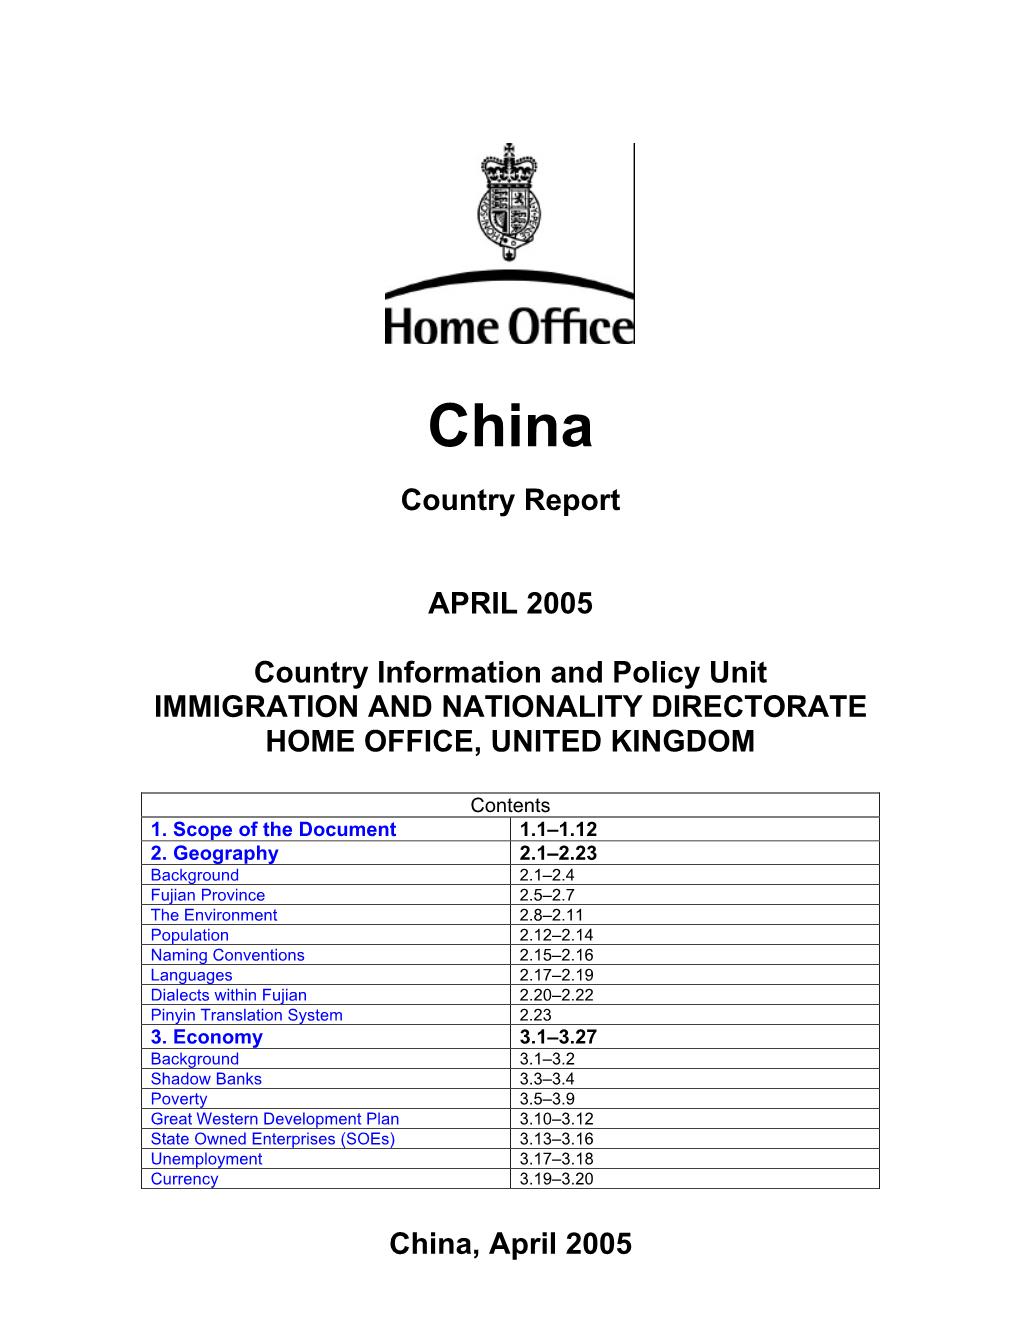 UK Home Office China Country Report April 2005